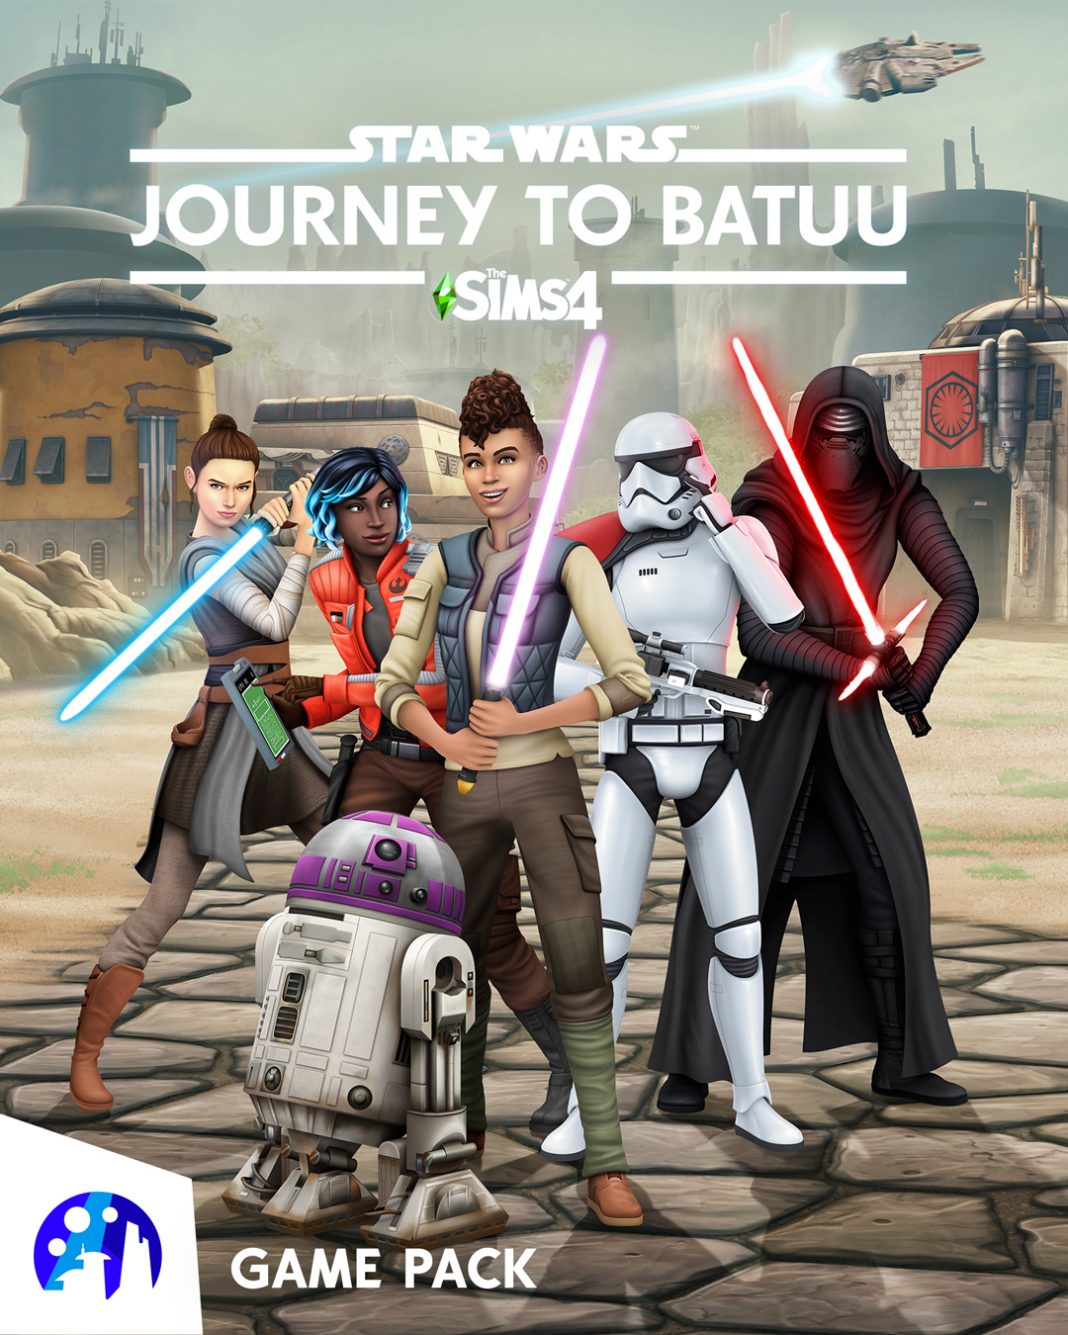 the-sims-4-star-wars-journey-to-batuu-official-logo-box-art-icon-and-render-simsvip